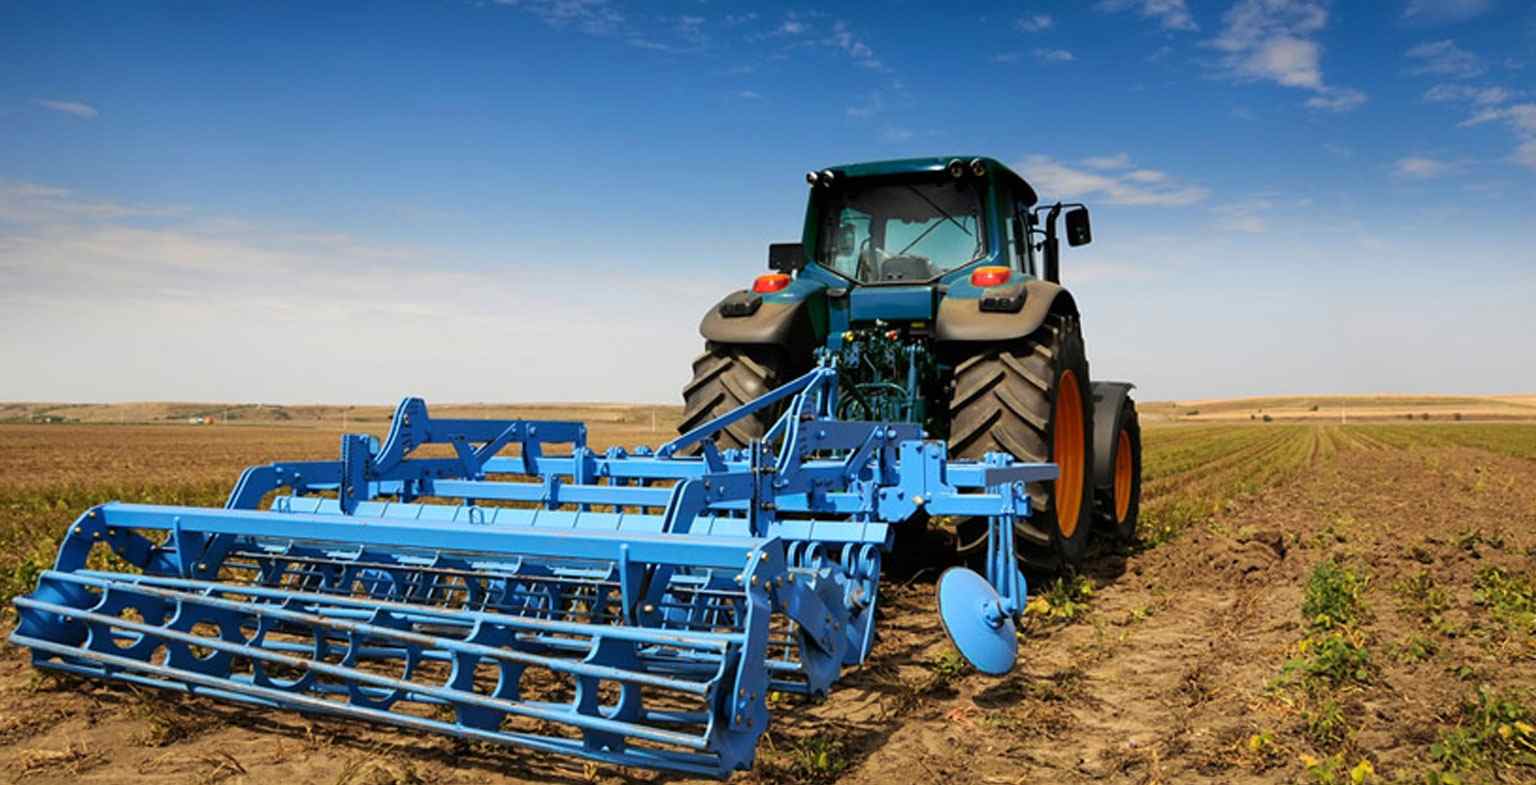 Strenx Agriculture Equipment